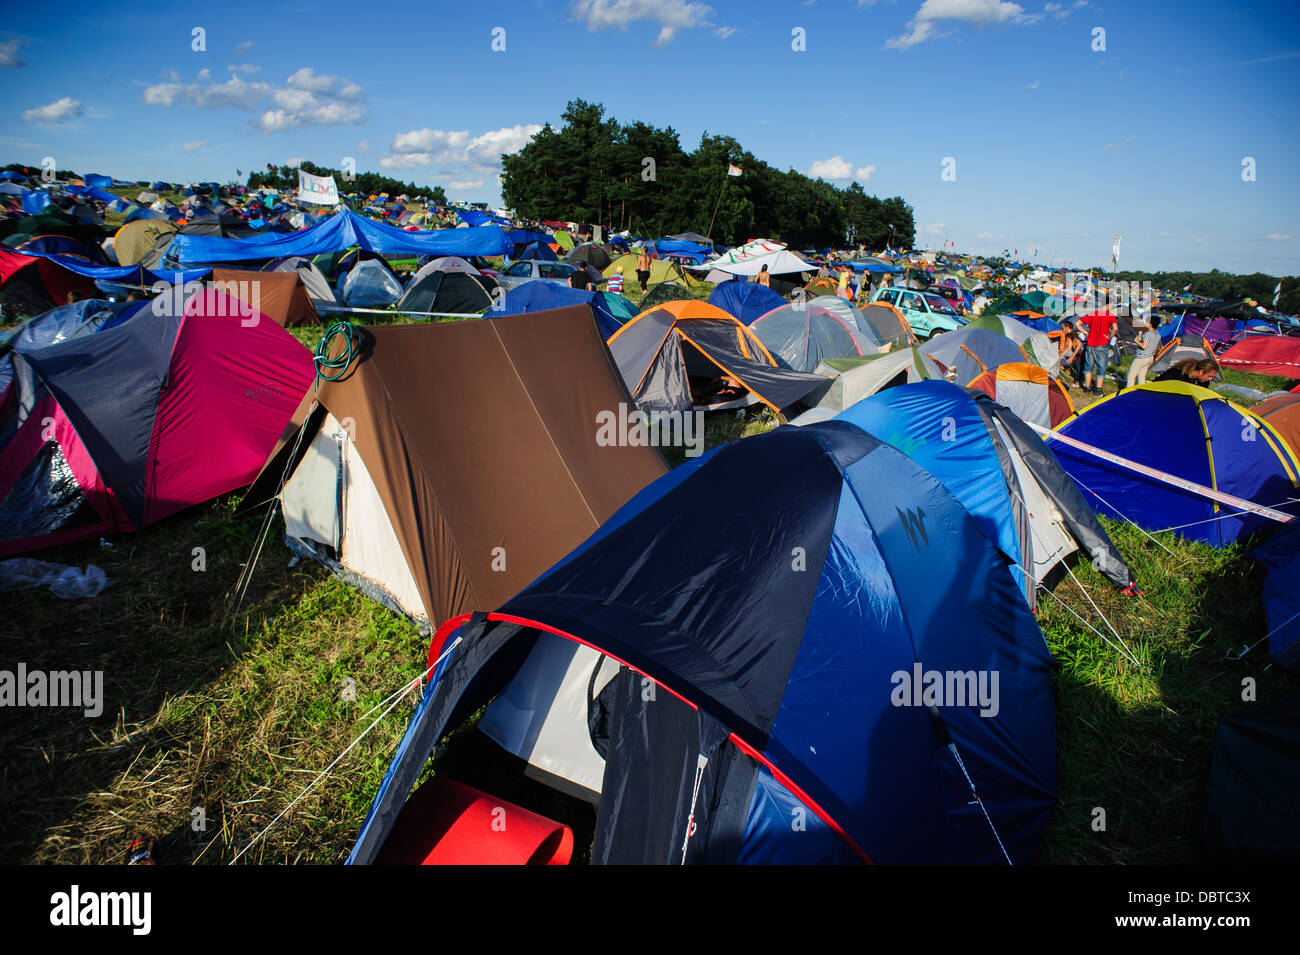 View of one of the capsites at the Przystanek Woodstock - Europe's largest open air Music festival in Kostrzyn, Poland. Stock Photo